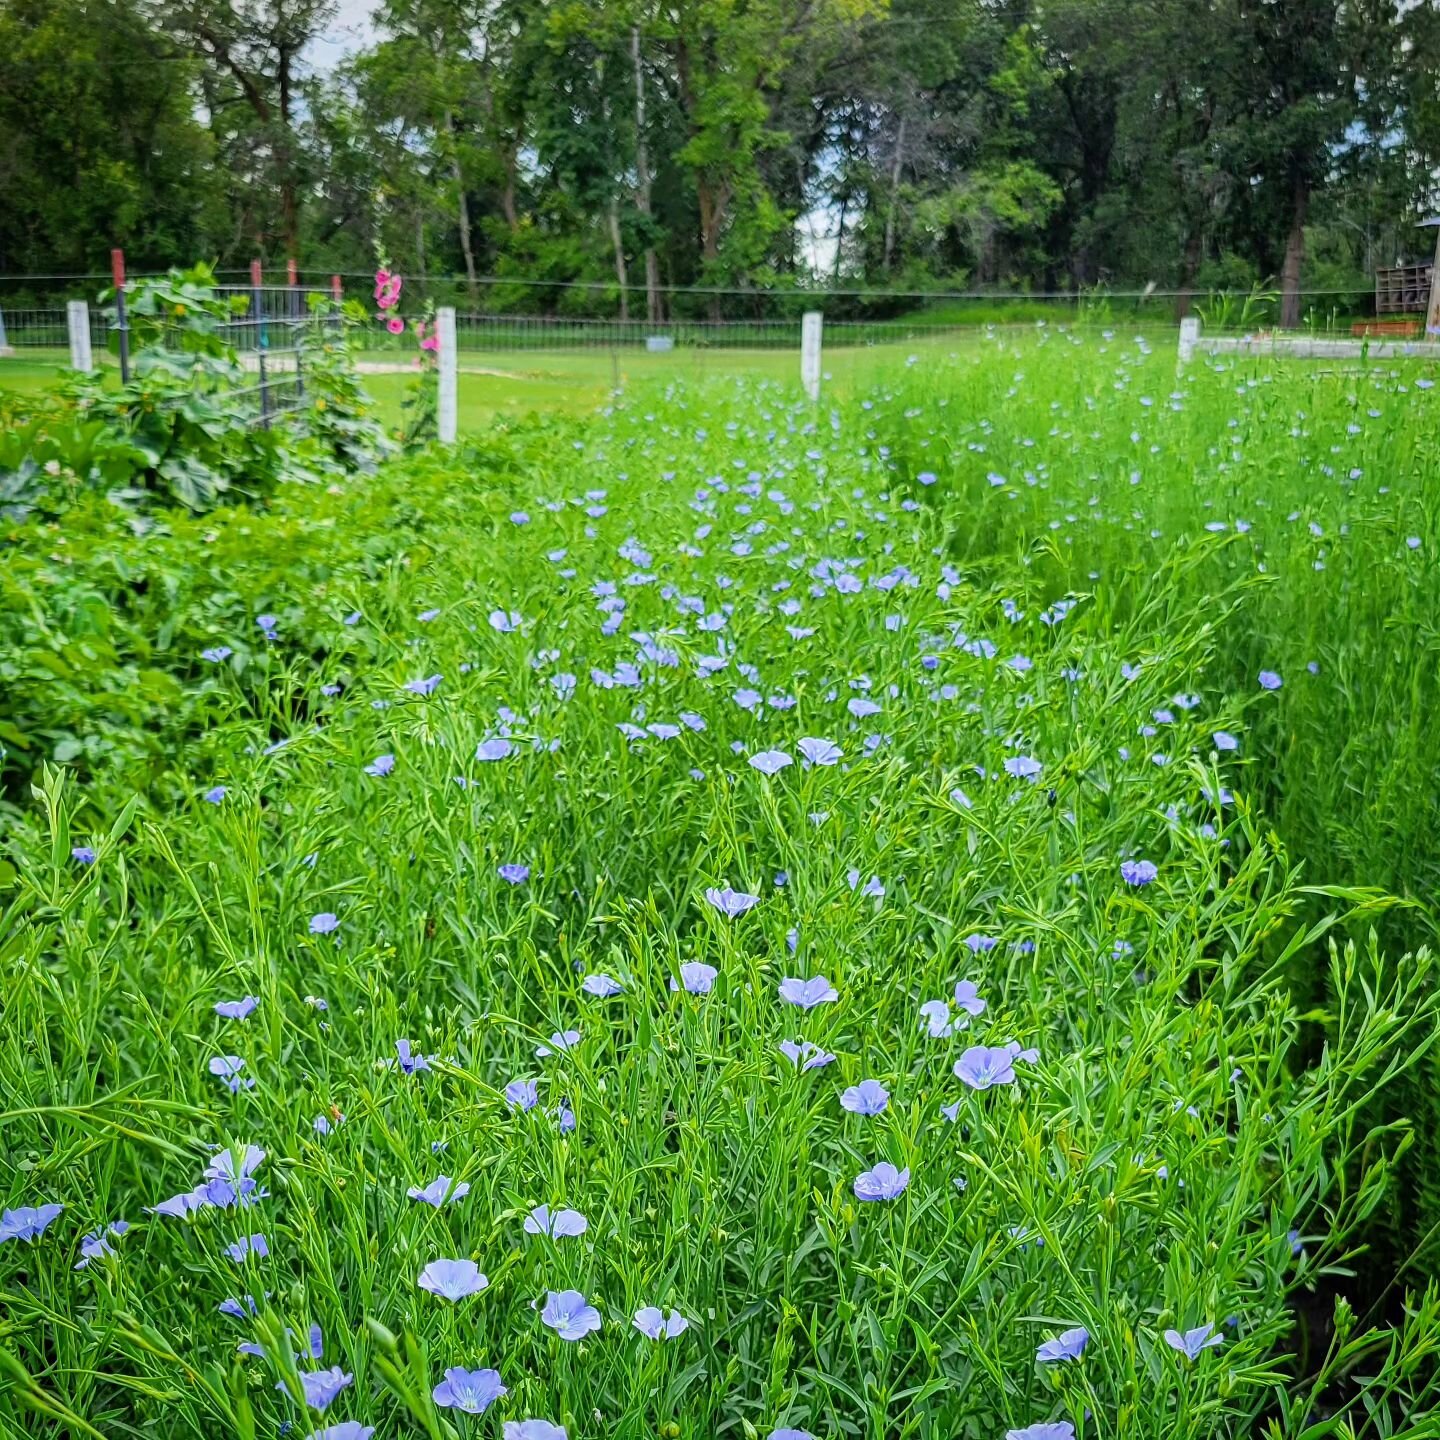 The flax is in full bloom at 56 days from planting, and what a pretty blue sight it is. 💙 

Growth is exceptional as well with the Nathalie variety going strong at 46 inches compared to the Taproot at 37&quot; and Linore at 33&quot;.

There's some b